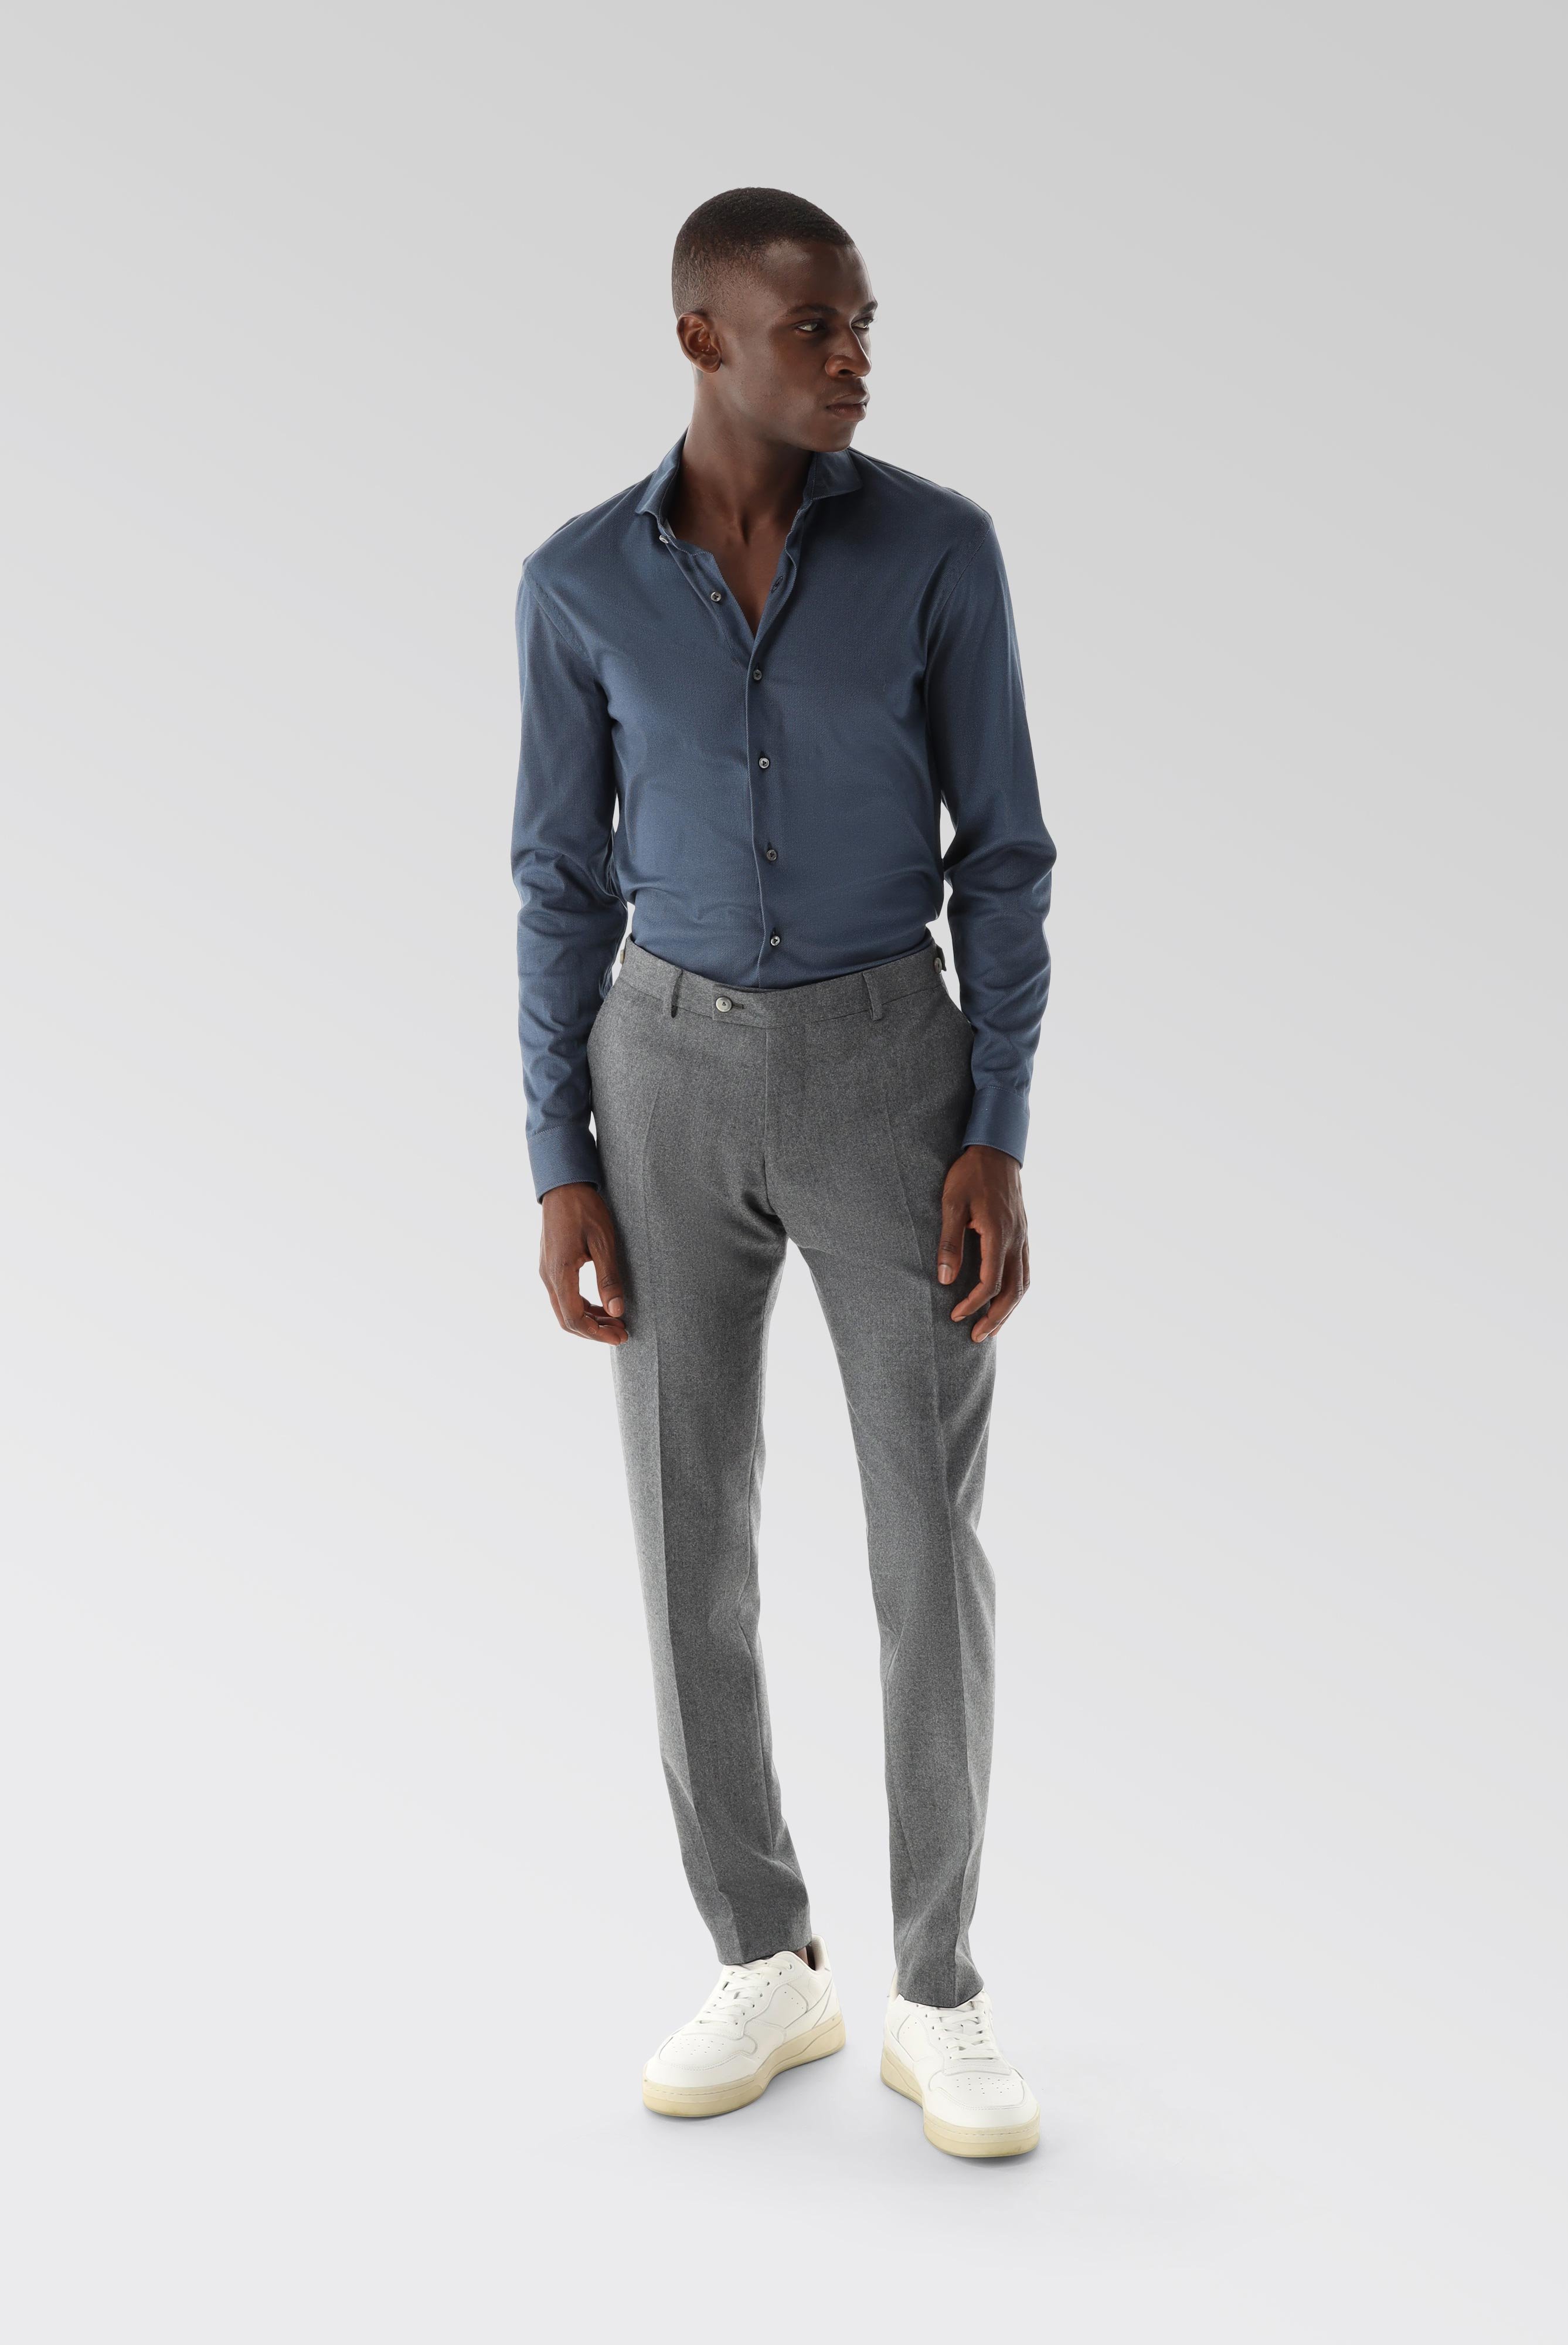 Casual Shirts+Jersey Shirt with a Twill Print Tailor Fit+20.1683.UC.187749.782.XL